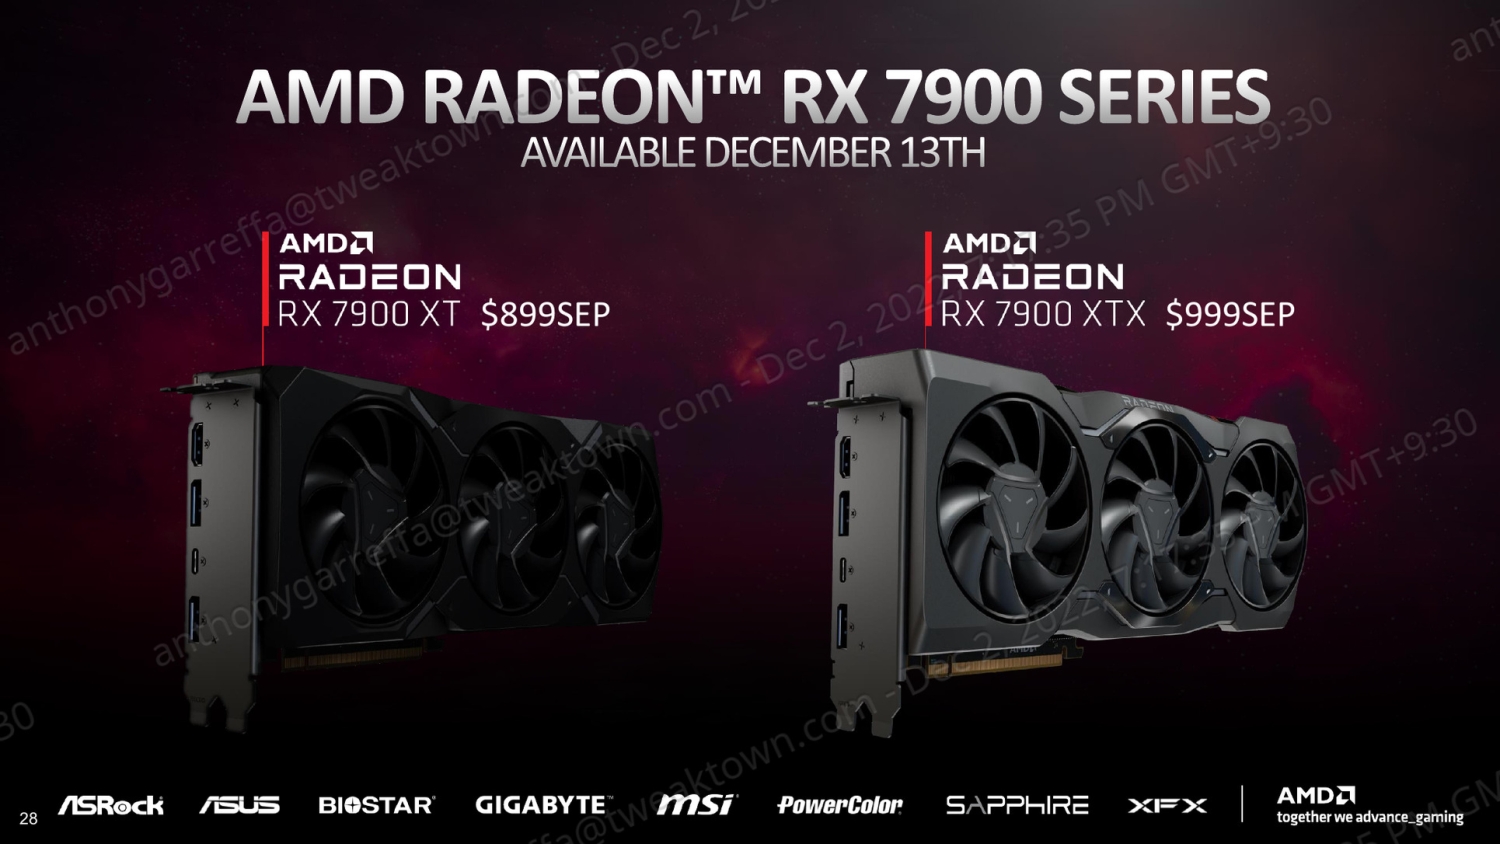 AMD's RX 7900 XTX claims could spell big trouble for Nvidia